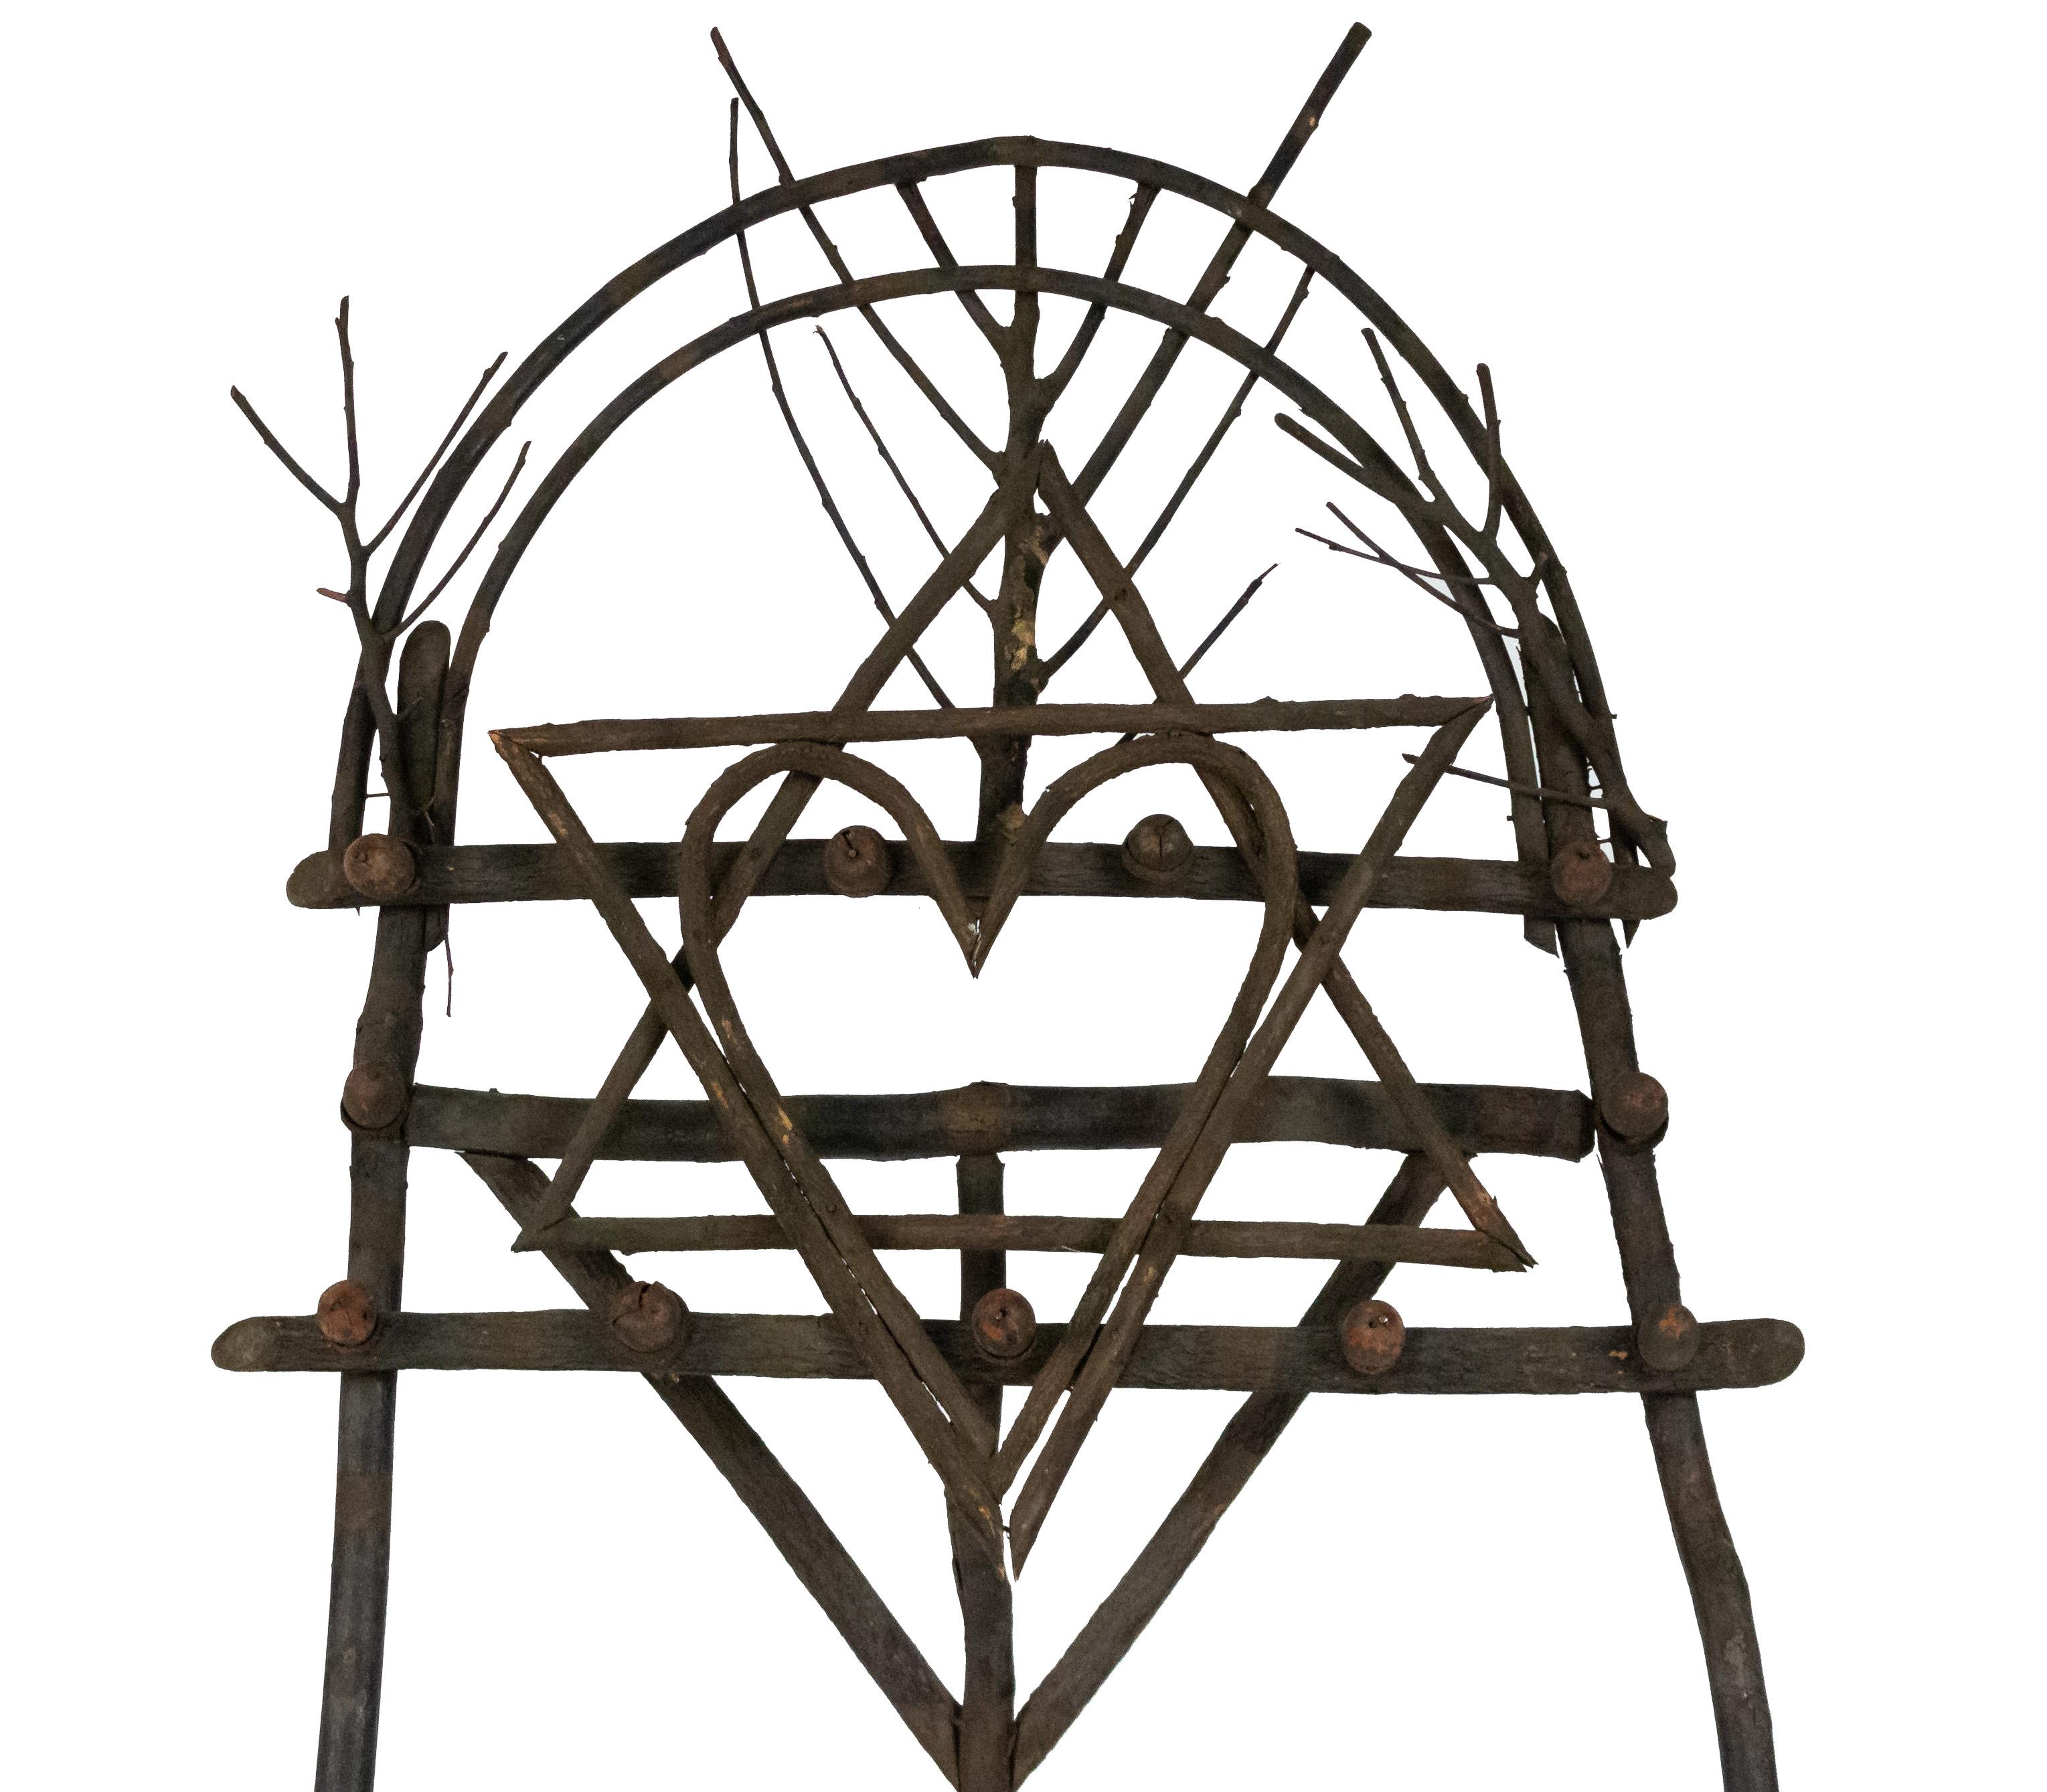 Rustic Adirondack natural twig wood easel with geometric shape designs and carved acorn trim.
    